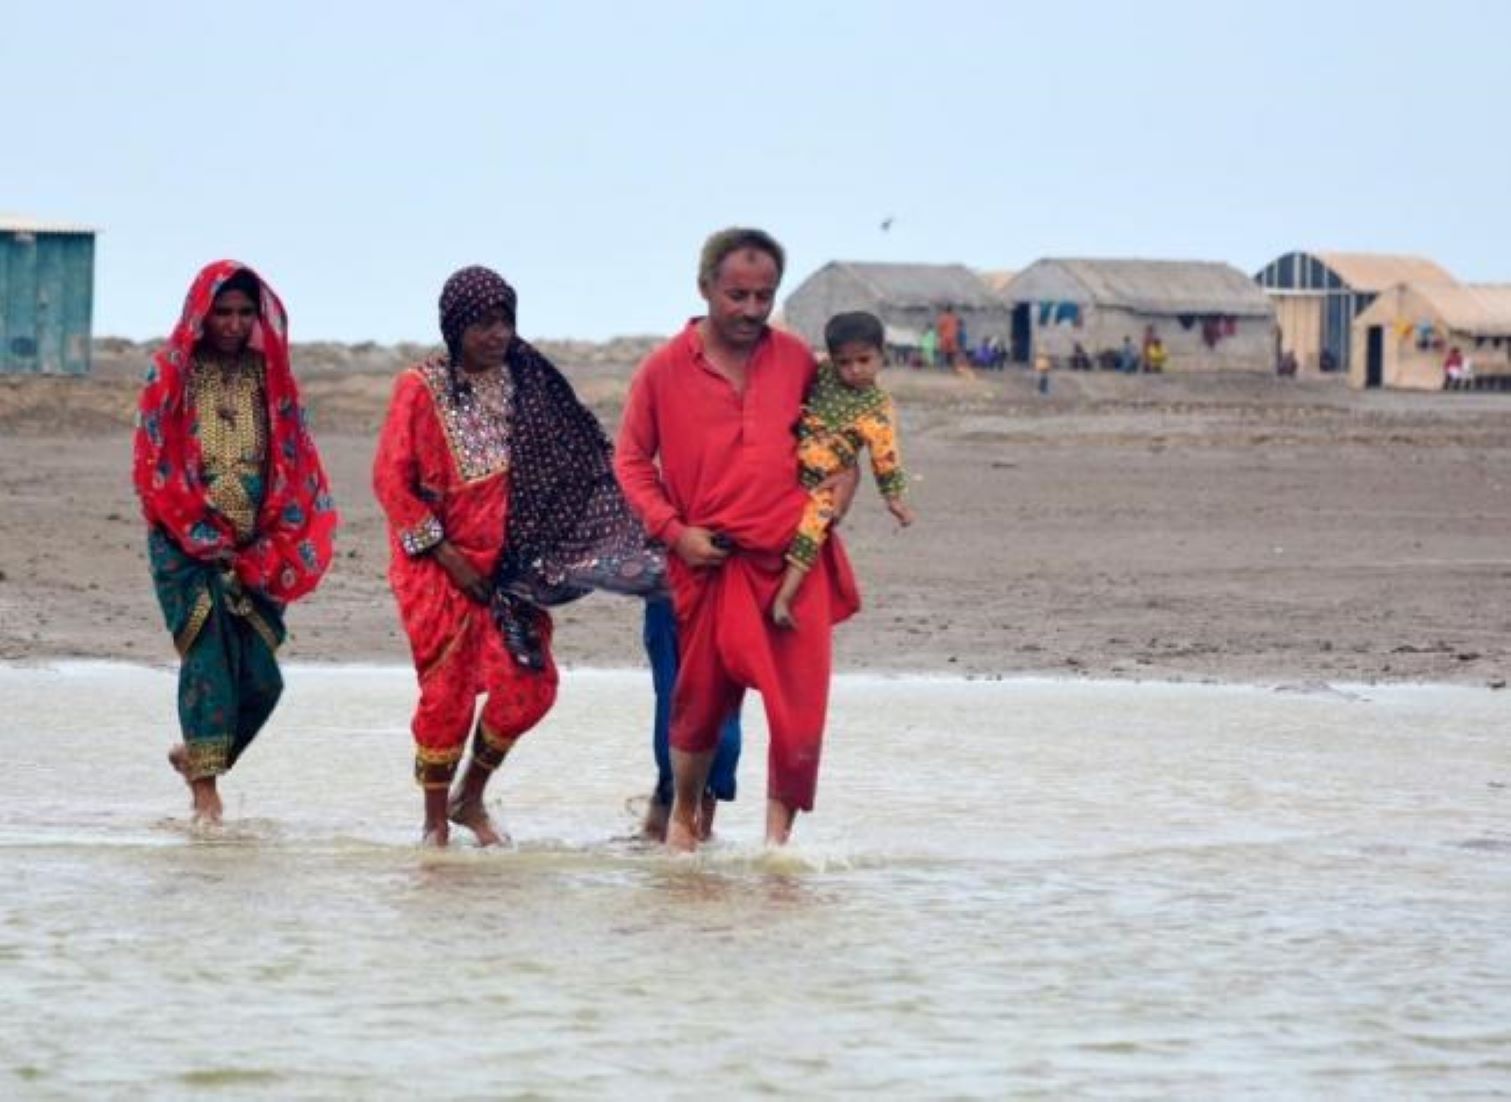 Life Returns To Normal As Cyclone Biparjoy “Largely Spares” Pakistan